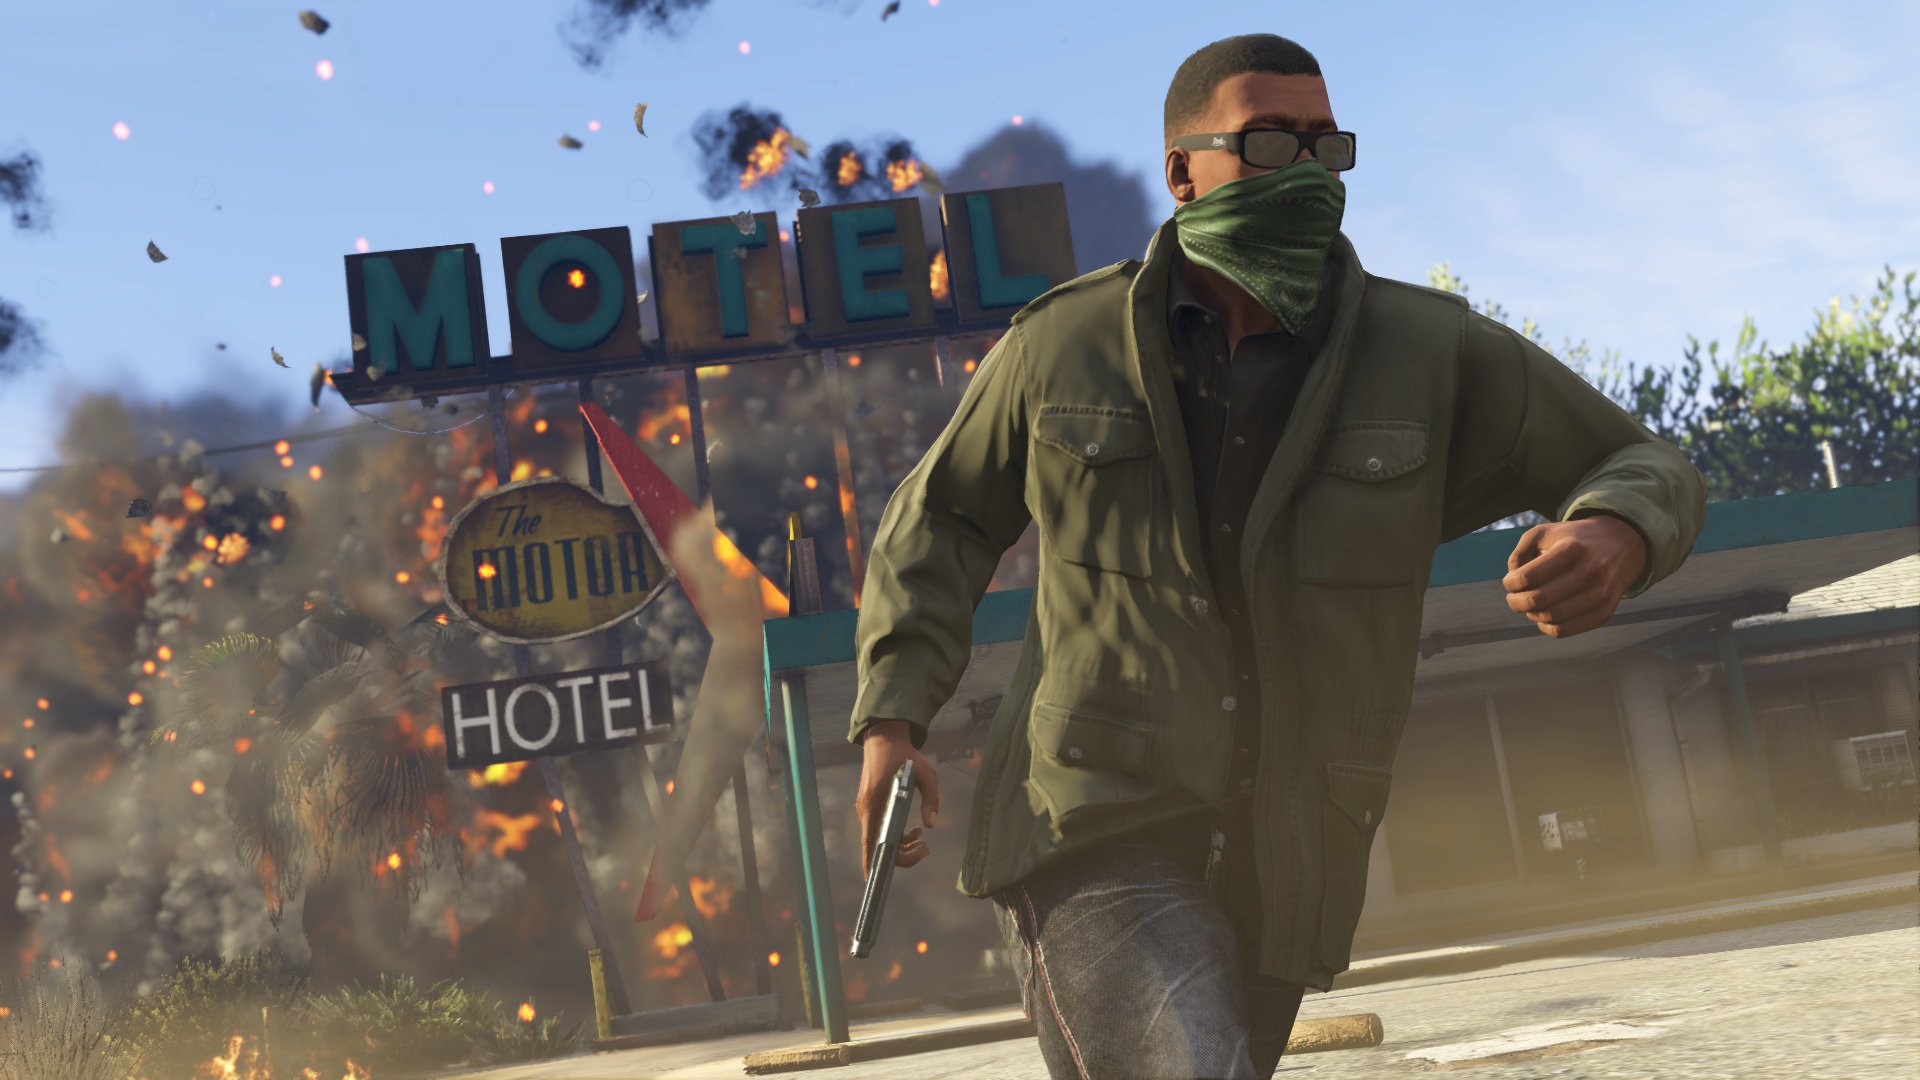 Grand Theft Auto VI: PS5 And Xbox Series X/S Release Confirmed For